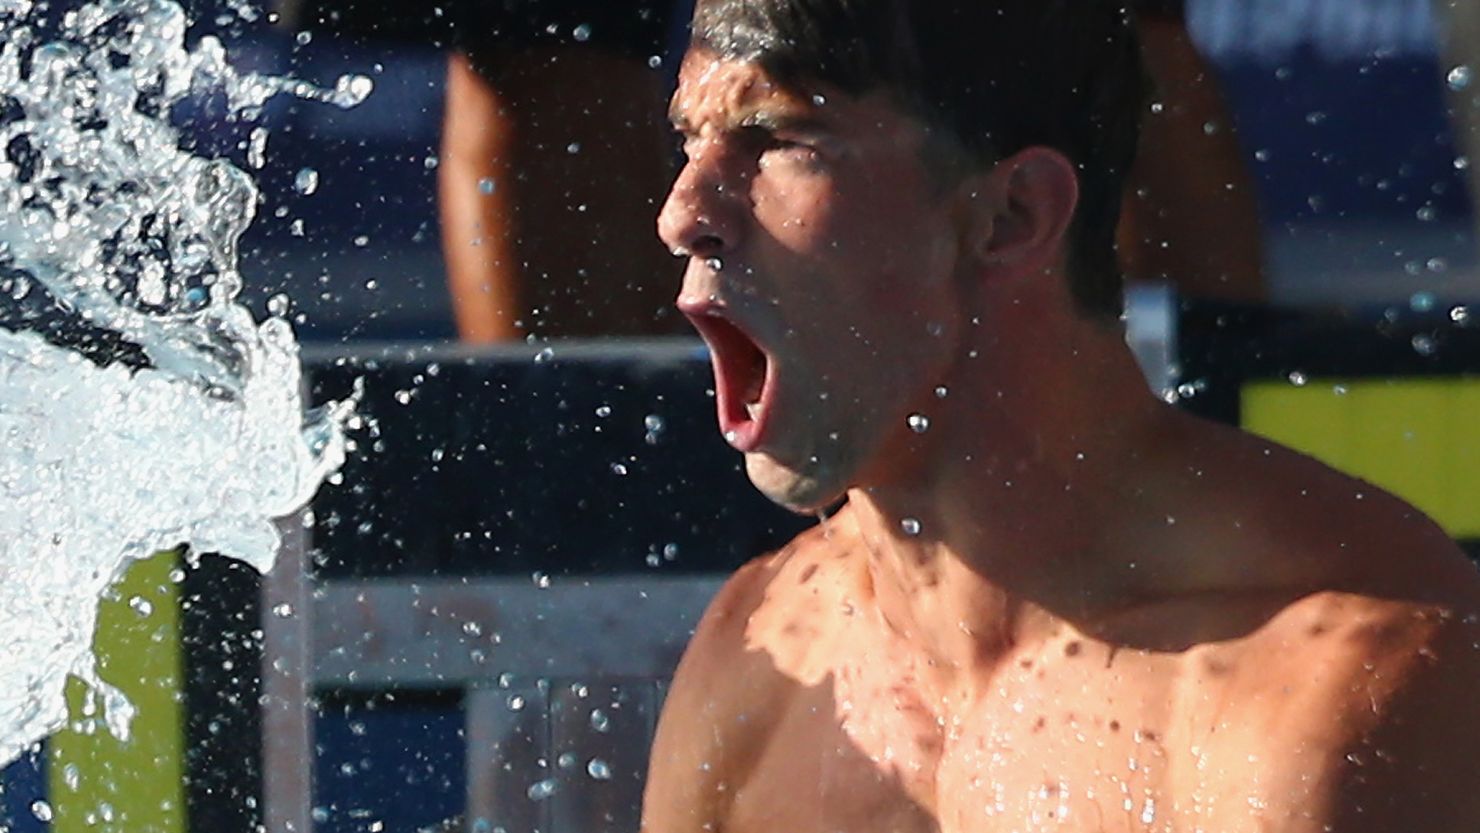 Michael Phelps reacts after winning the 100m butterfly in a world leading time in San Antonio.